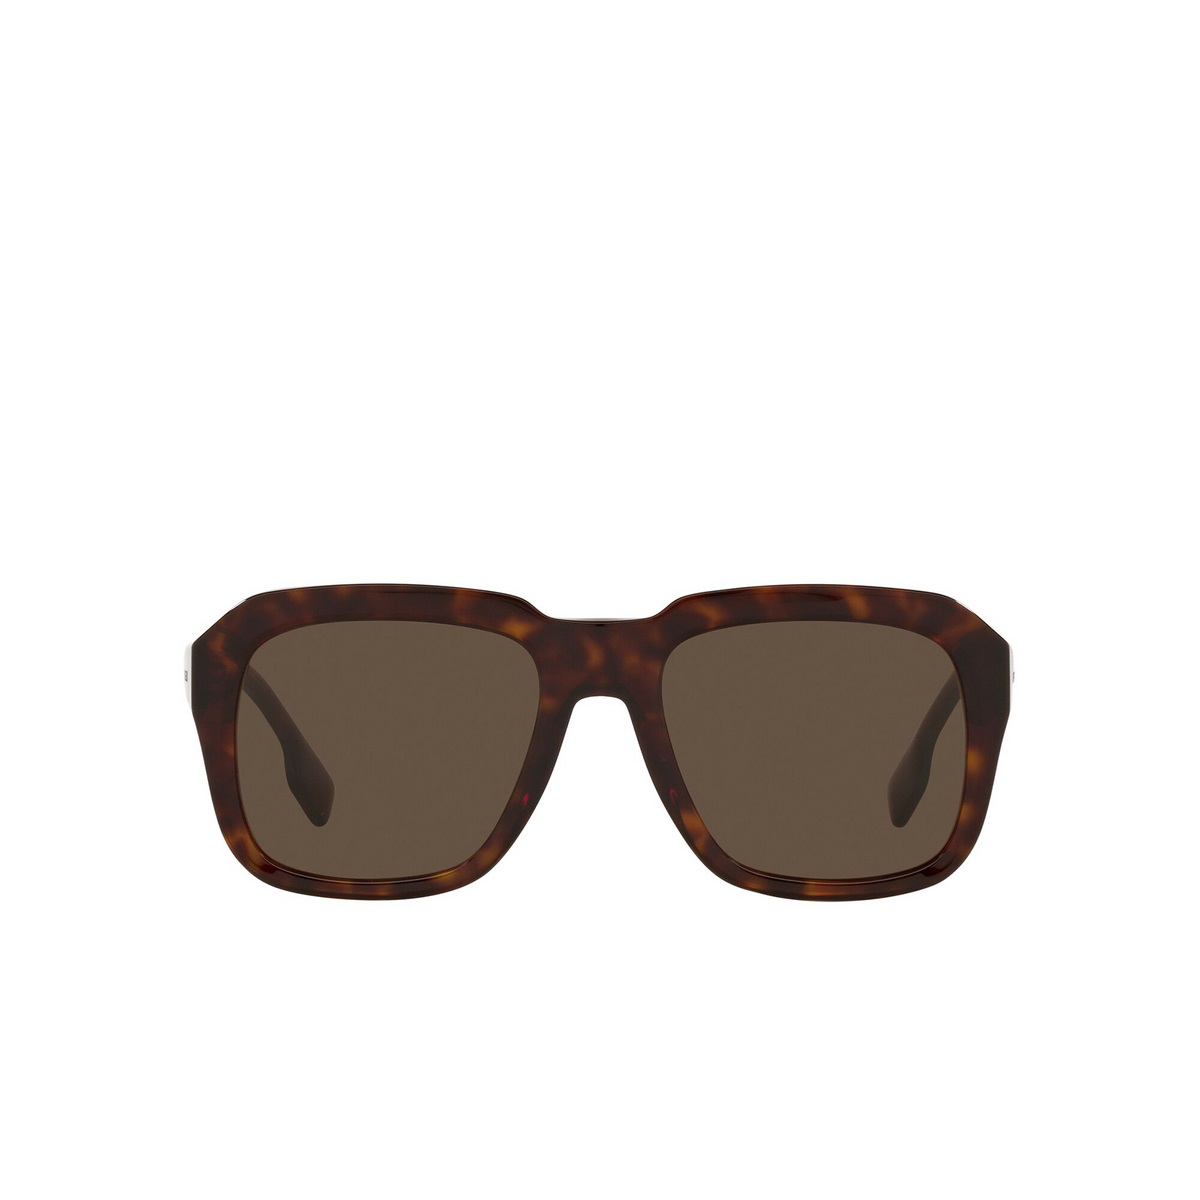 Burberry® Square Sunglasses: BE4350 Astley color 392073 Dark Havana - front view